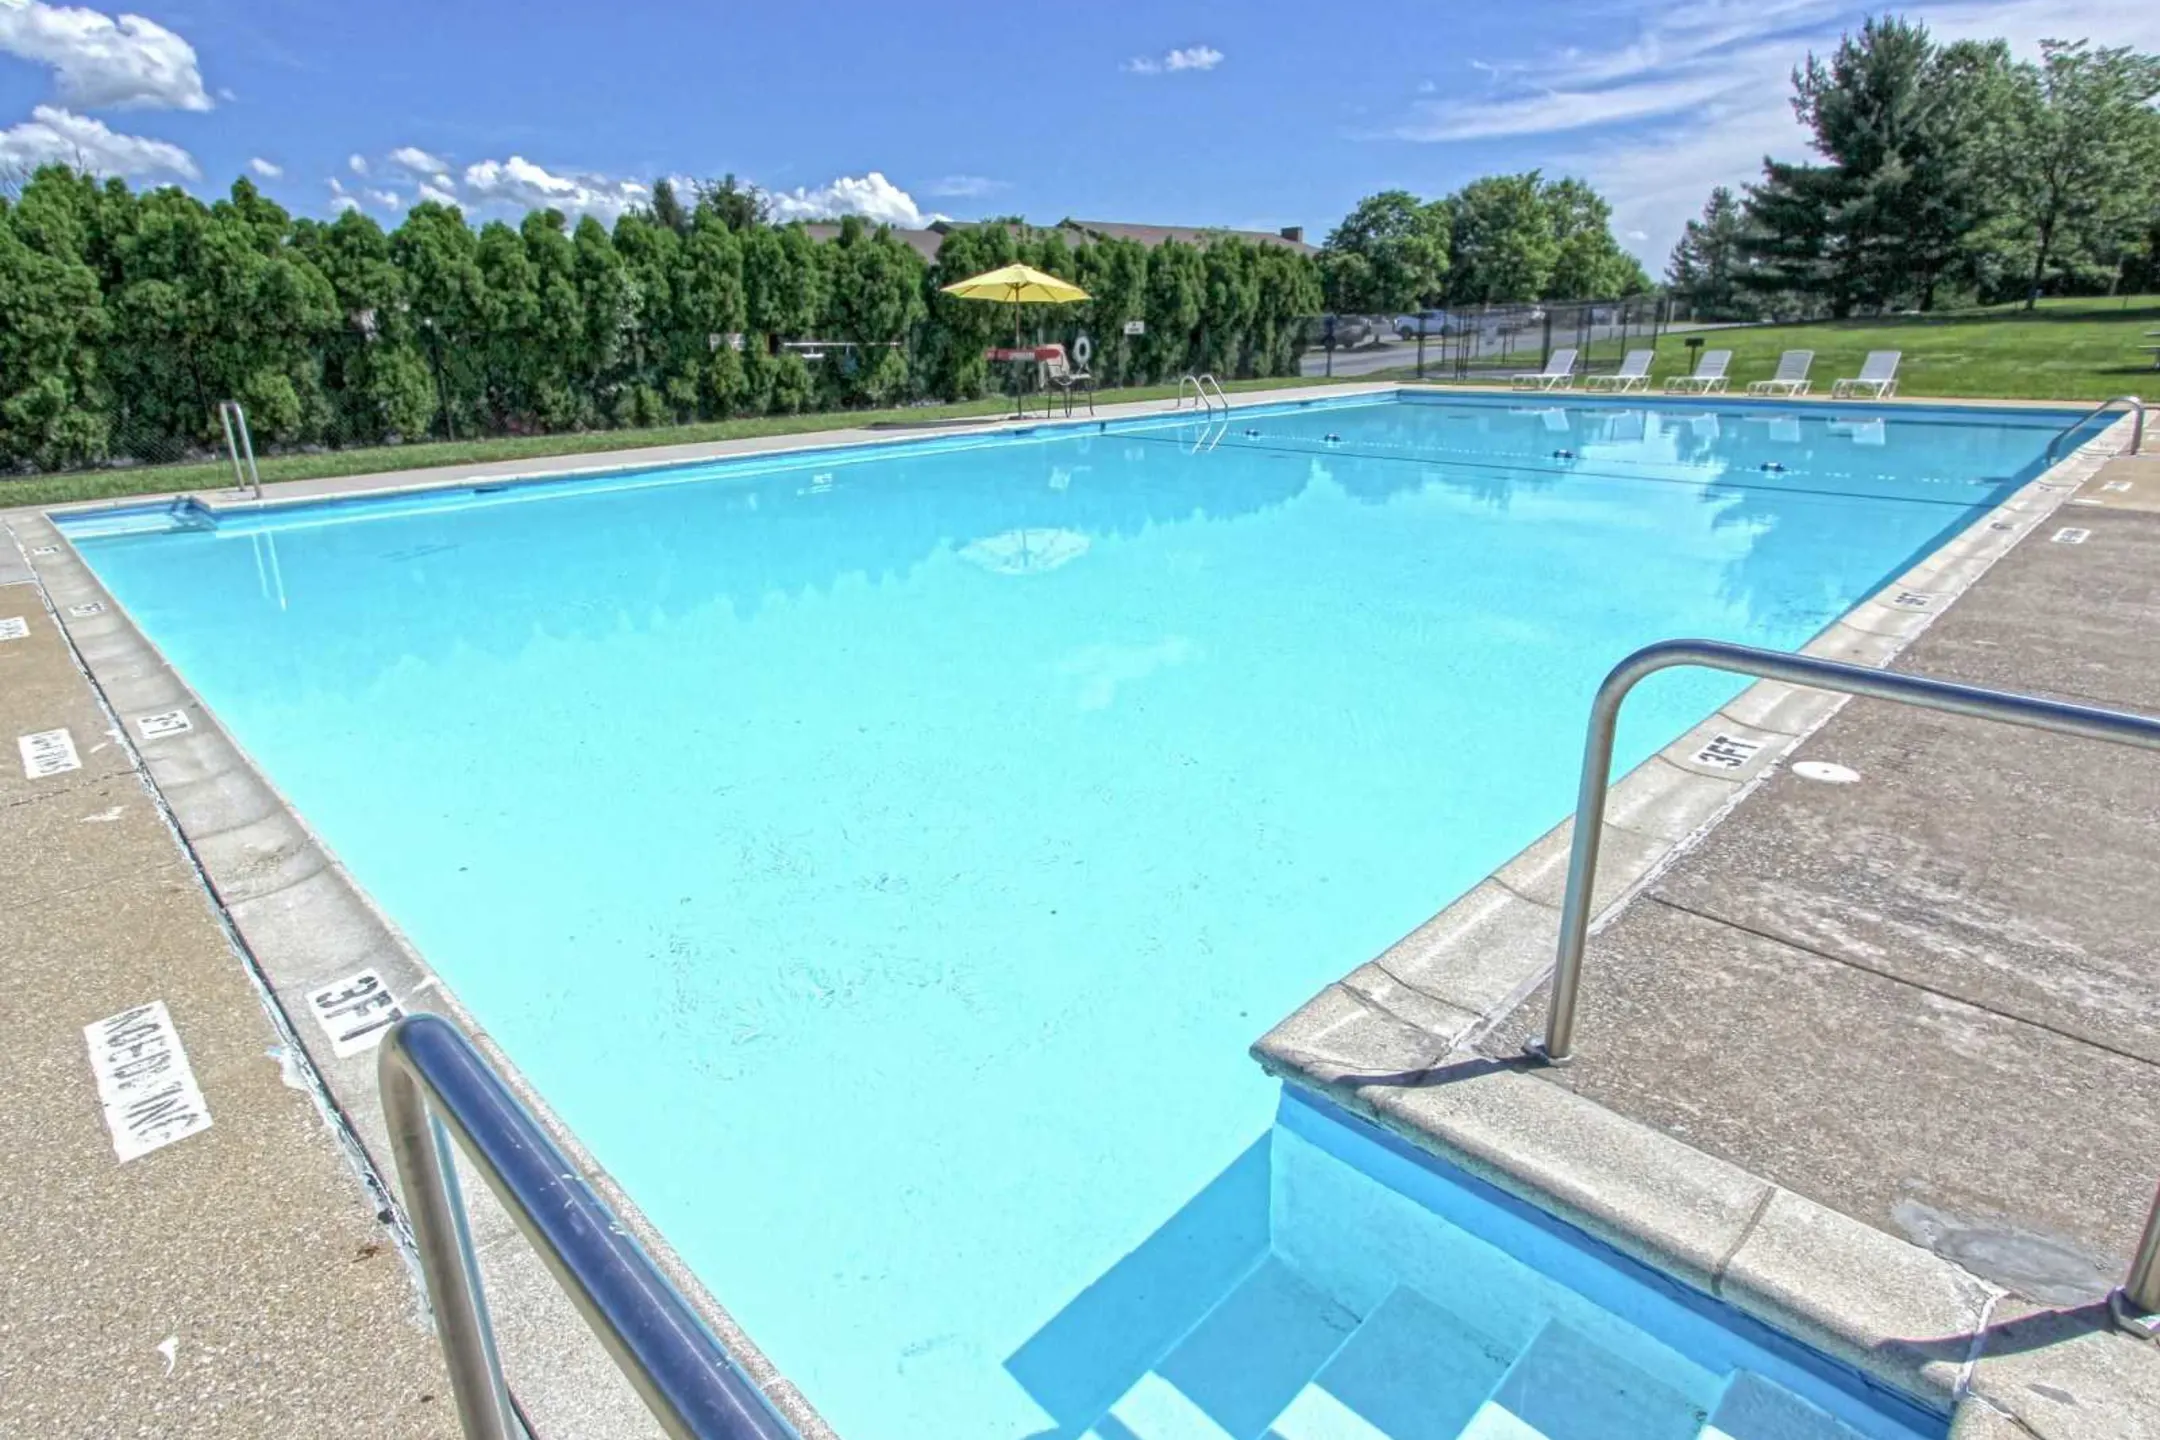 Pool - Pennswood Apartments & Townhomes - Harrisburg, PA